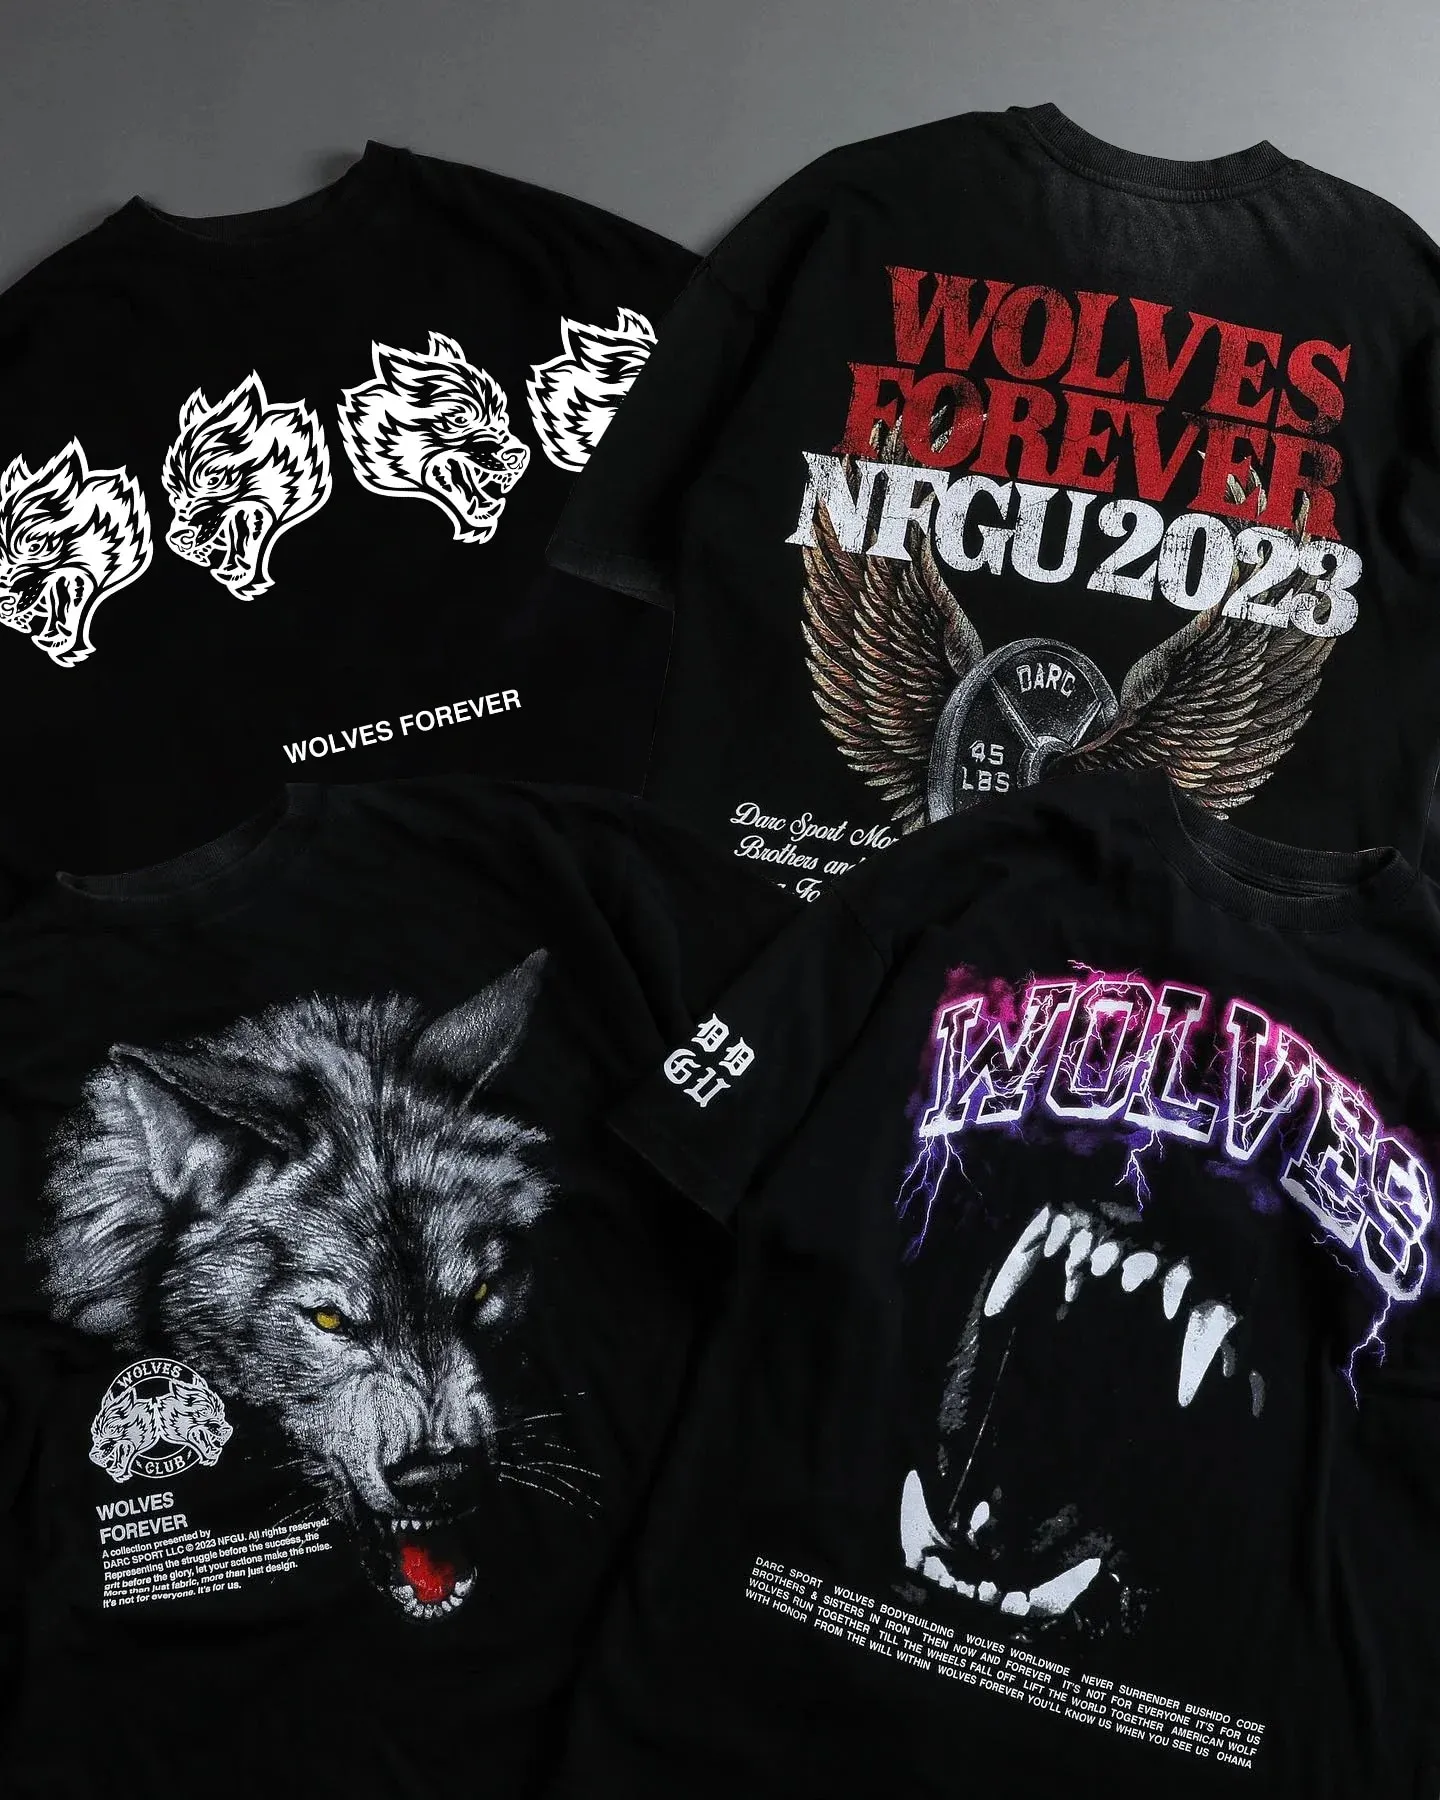 Darcs Wolves Gym Fitness T-shirts Oversized Bodybuilding Cotton High Quality Women Men Clothing Graphic Top Tees Workout US Size Sportwear Shirts